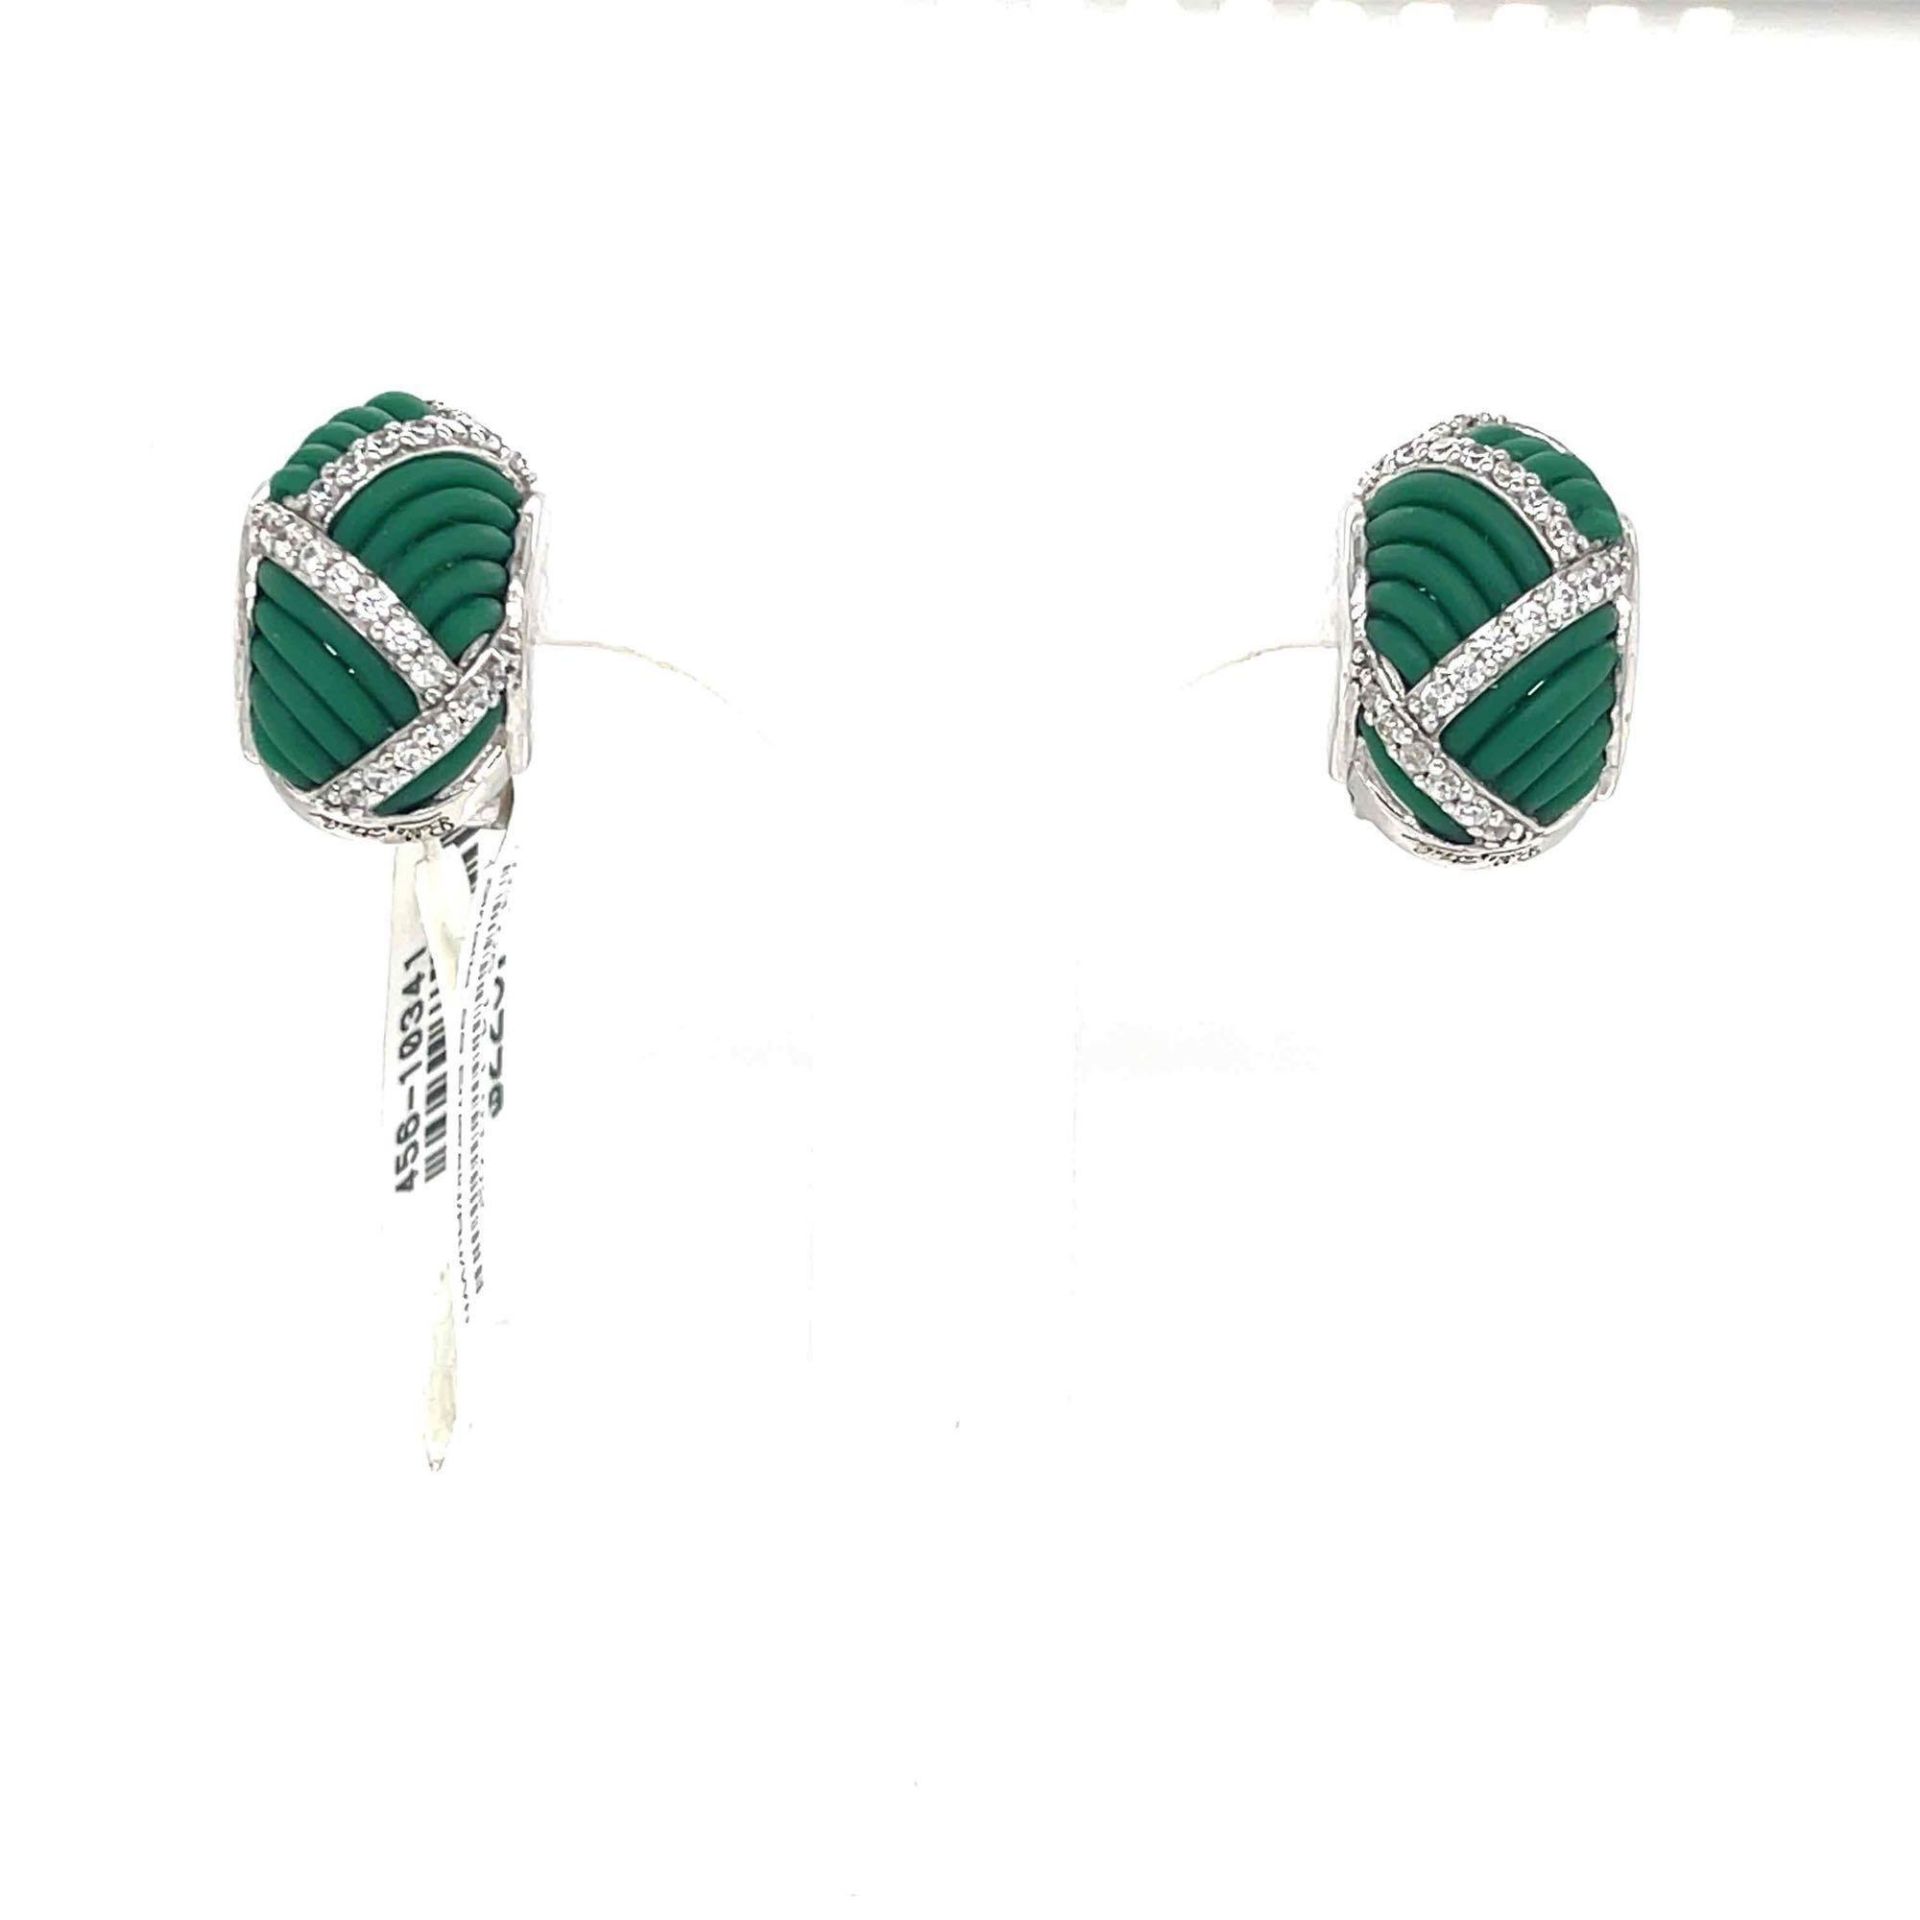 BELLE ETOILE STERLING SILVER STRIATTA GREEN RUBBER RING AND EARRING - Image 3 of 5